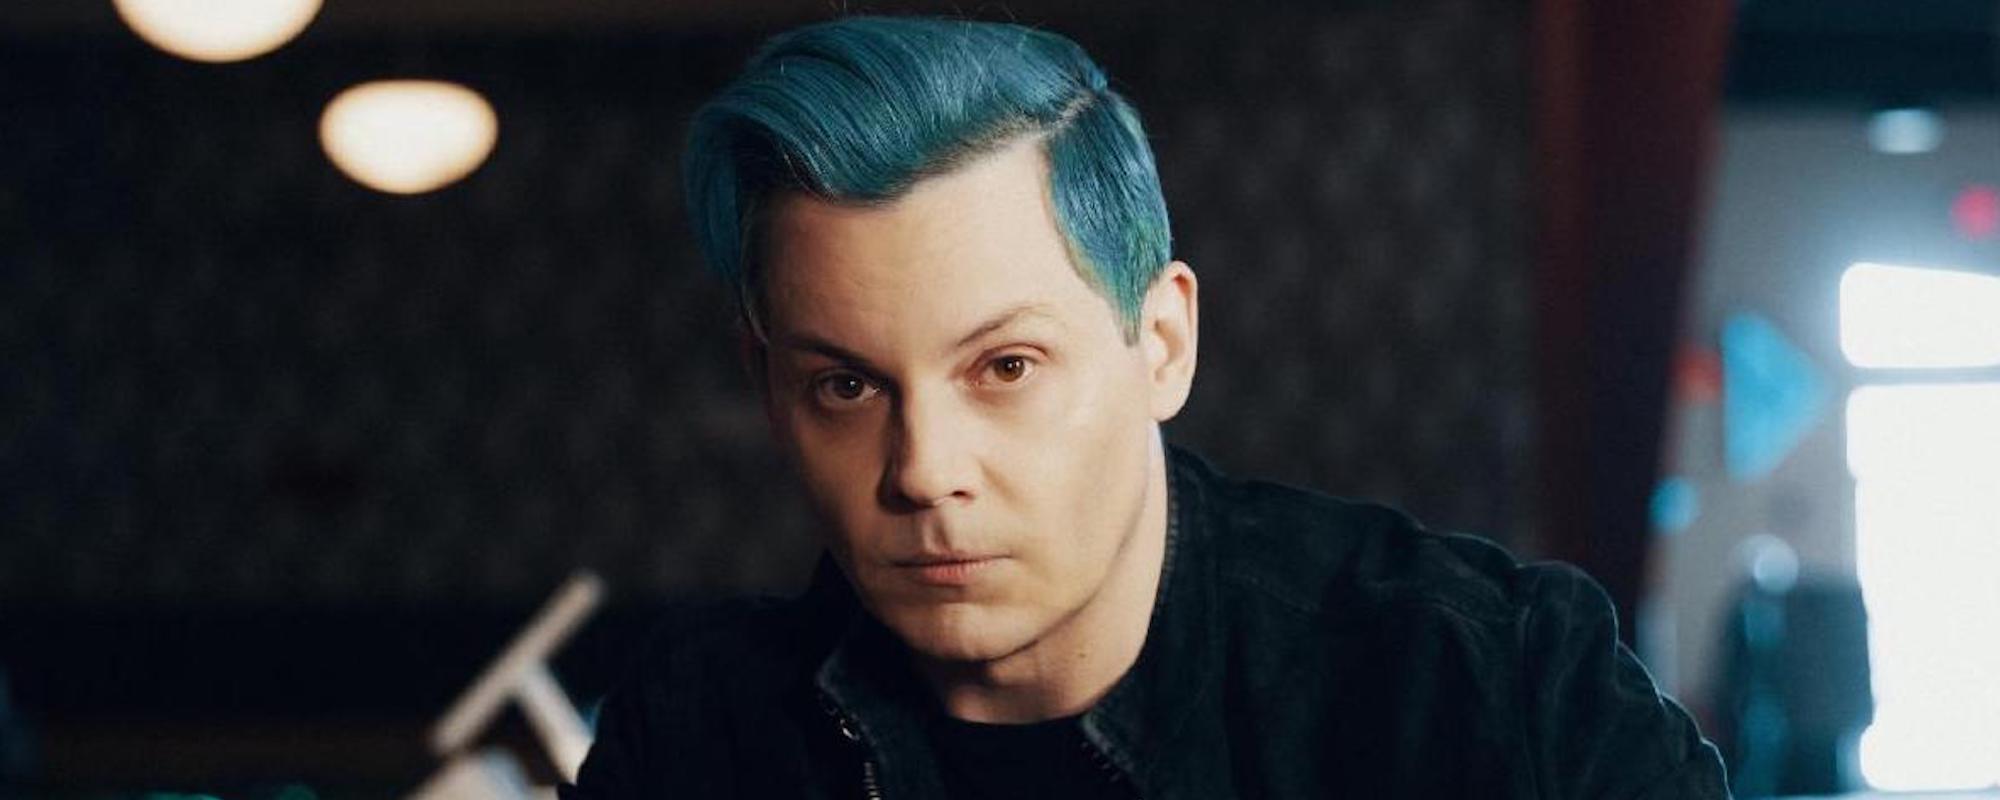 Jack White Schedules Two Intimate Acoustic Live Performances